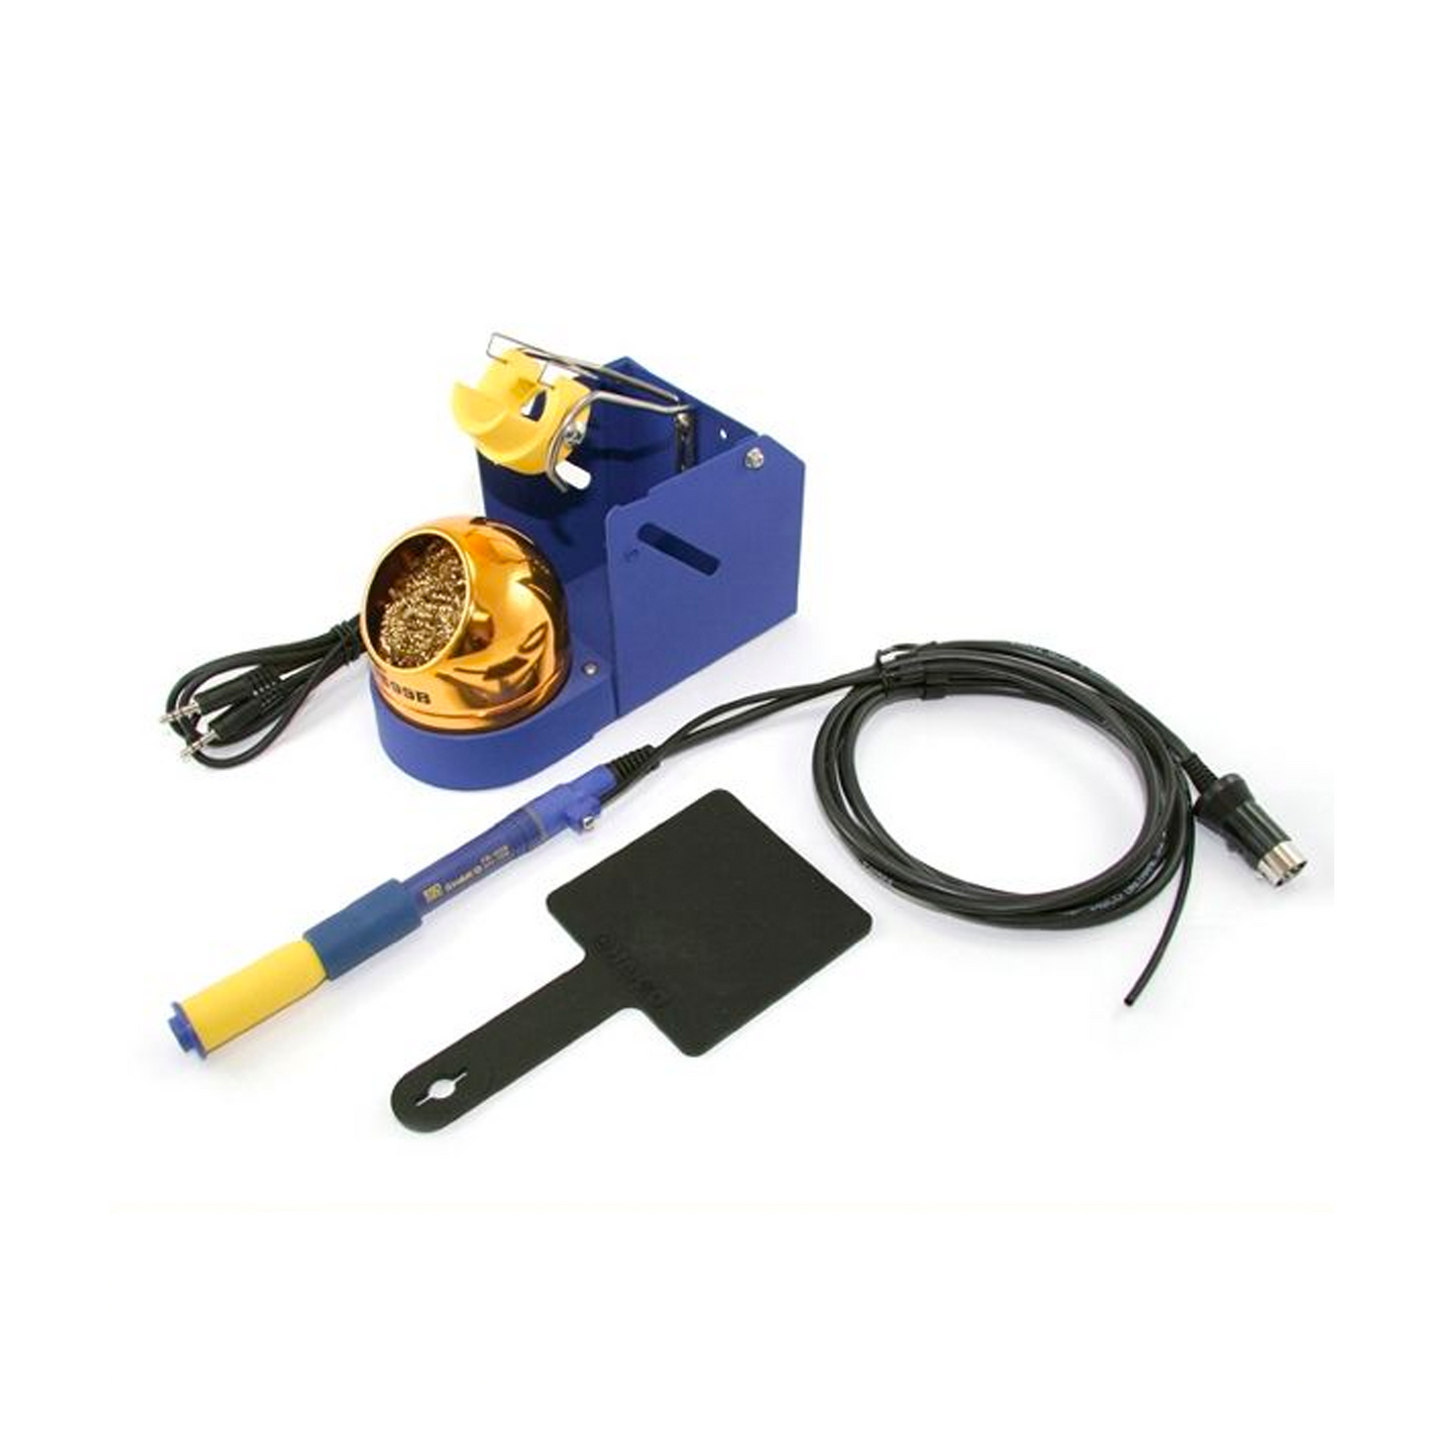 Hakko soldering iron FM2026 conversion kit N2 soldering with nozzle for PCB SMT assembly production line. consist of soldering iron holder with brass wire cleaning sponge, soldering iron excluding tip, heat resistant pad, cable